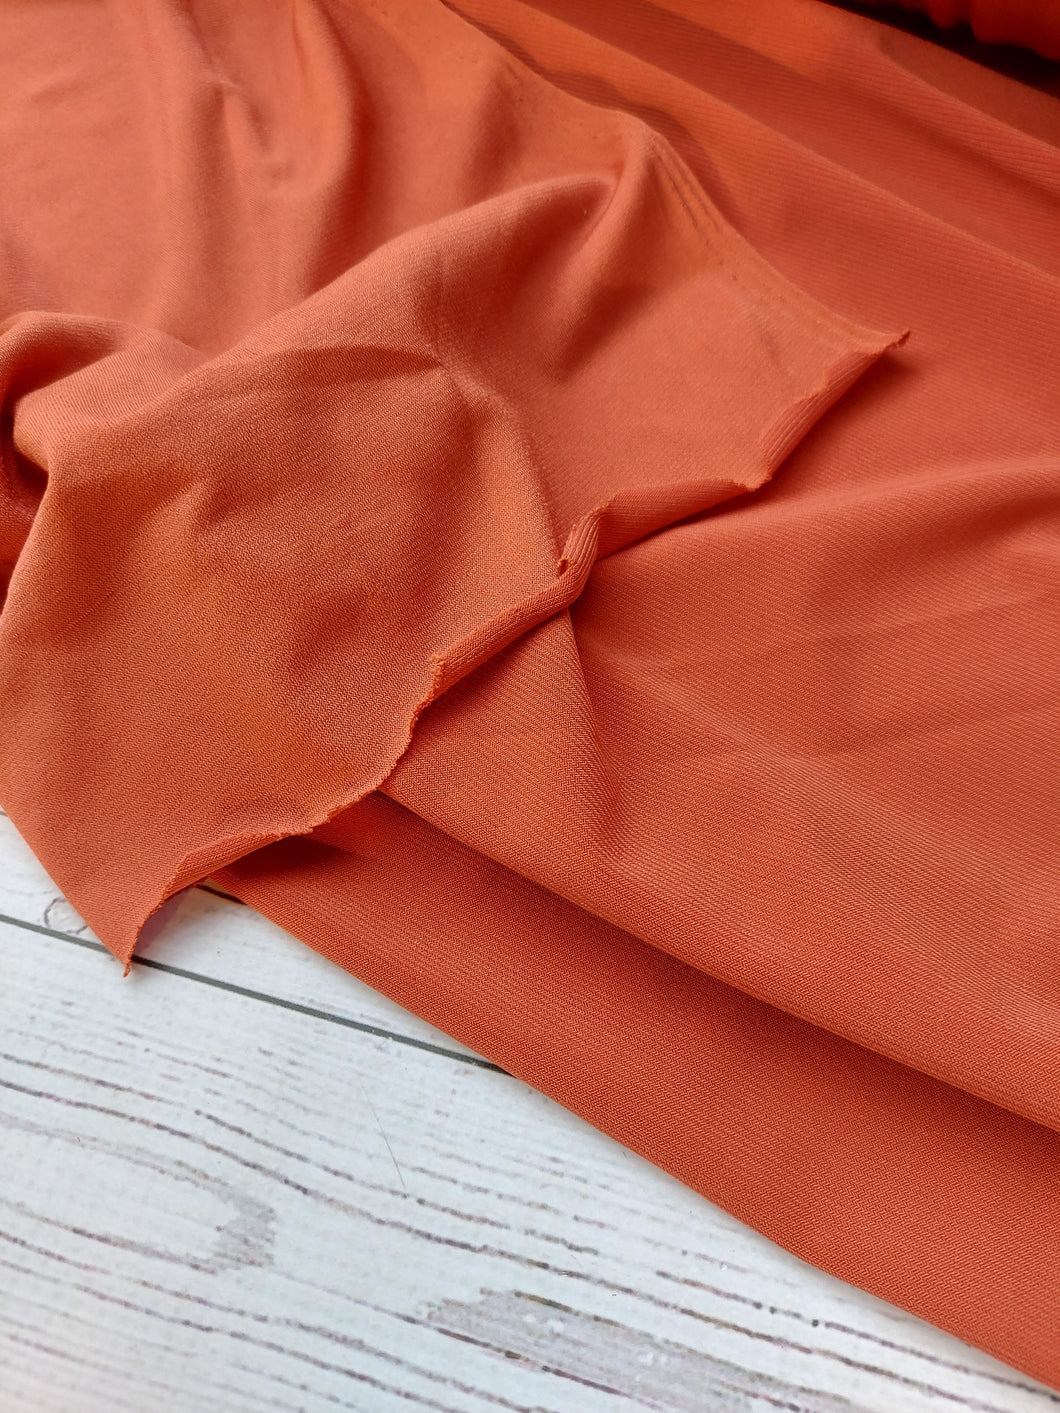 Rust ITY Knit (Lighter Weight Slip/Lining Fabric) {by the half yard}